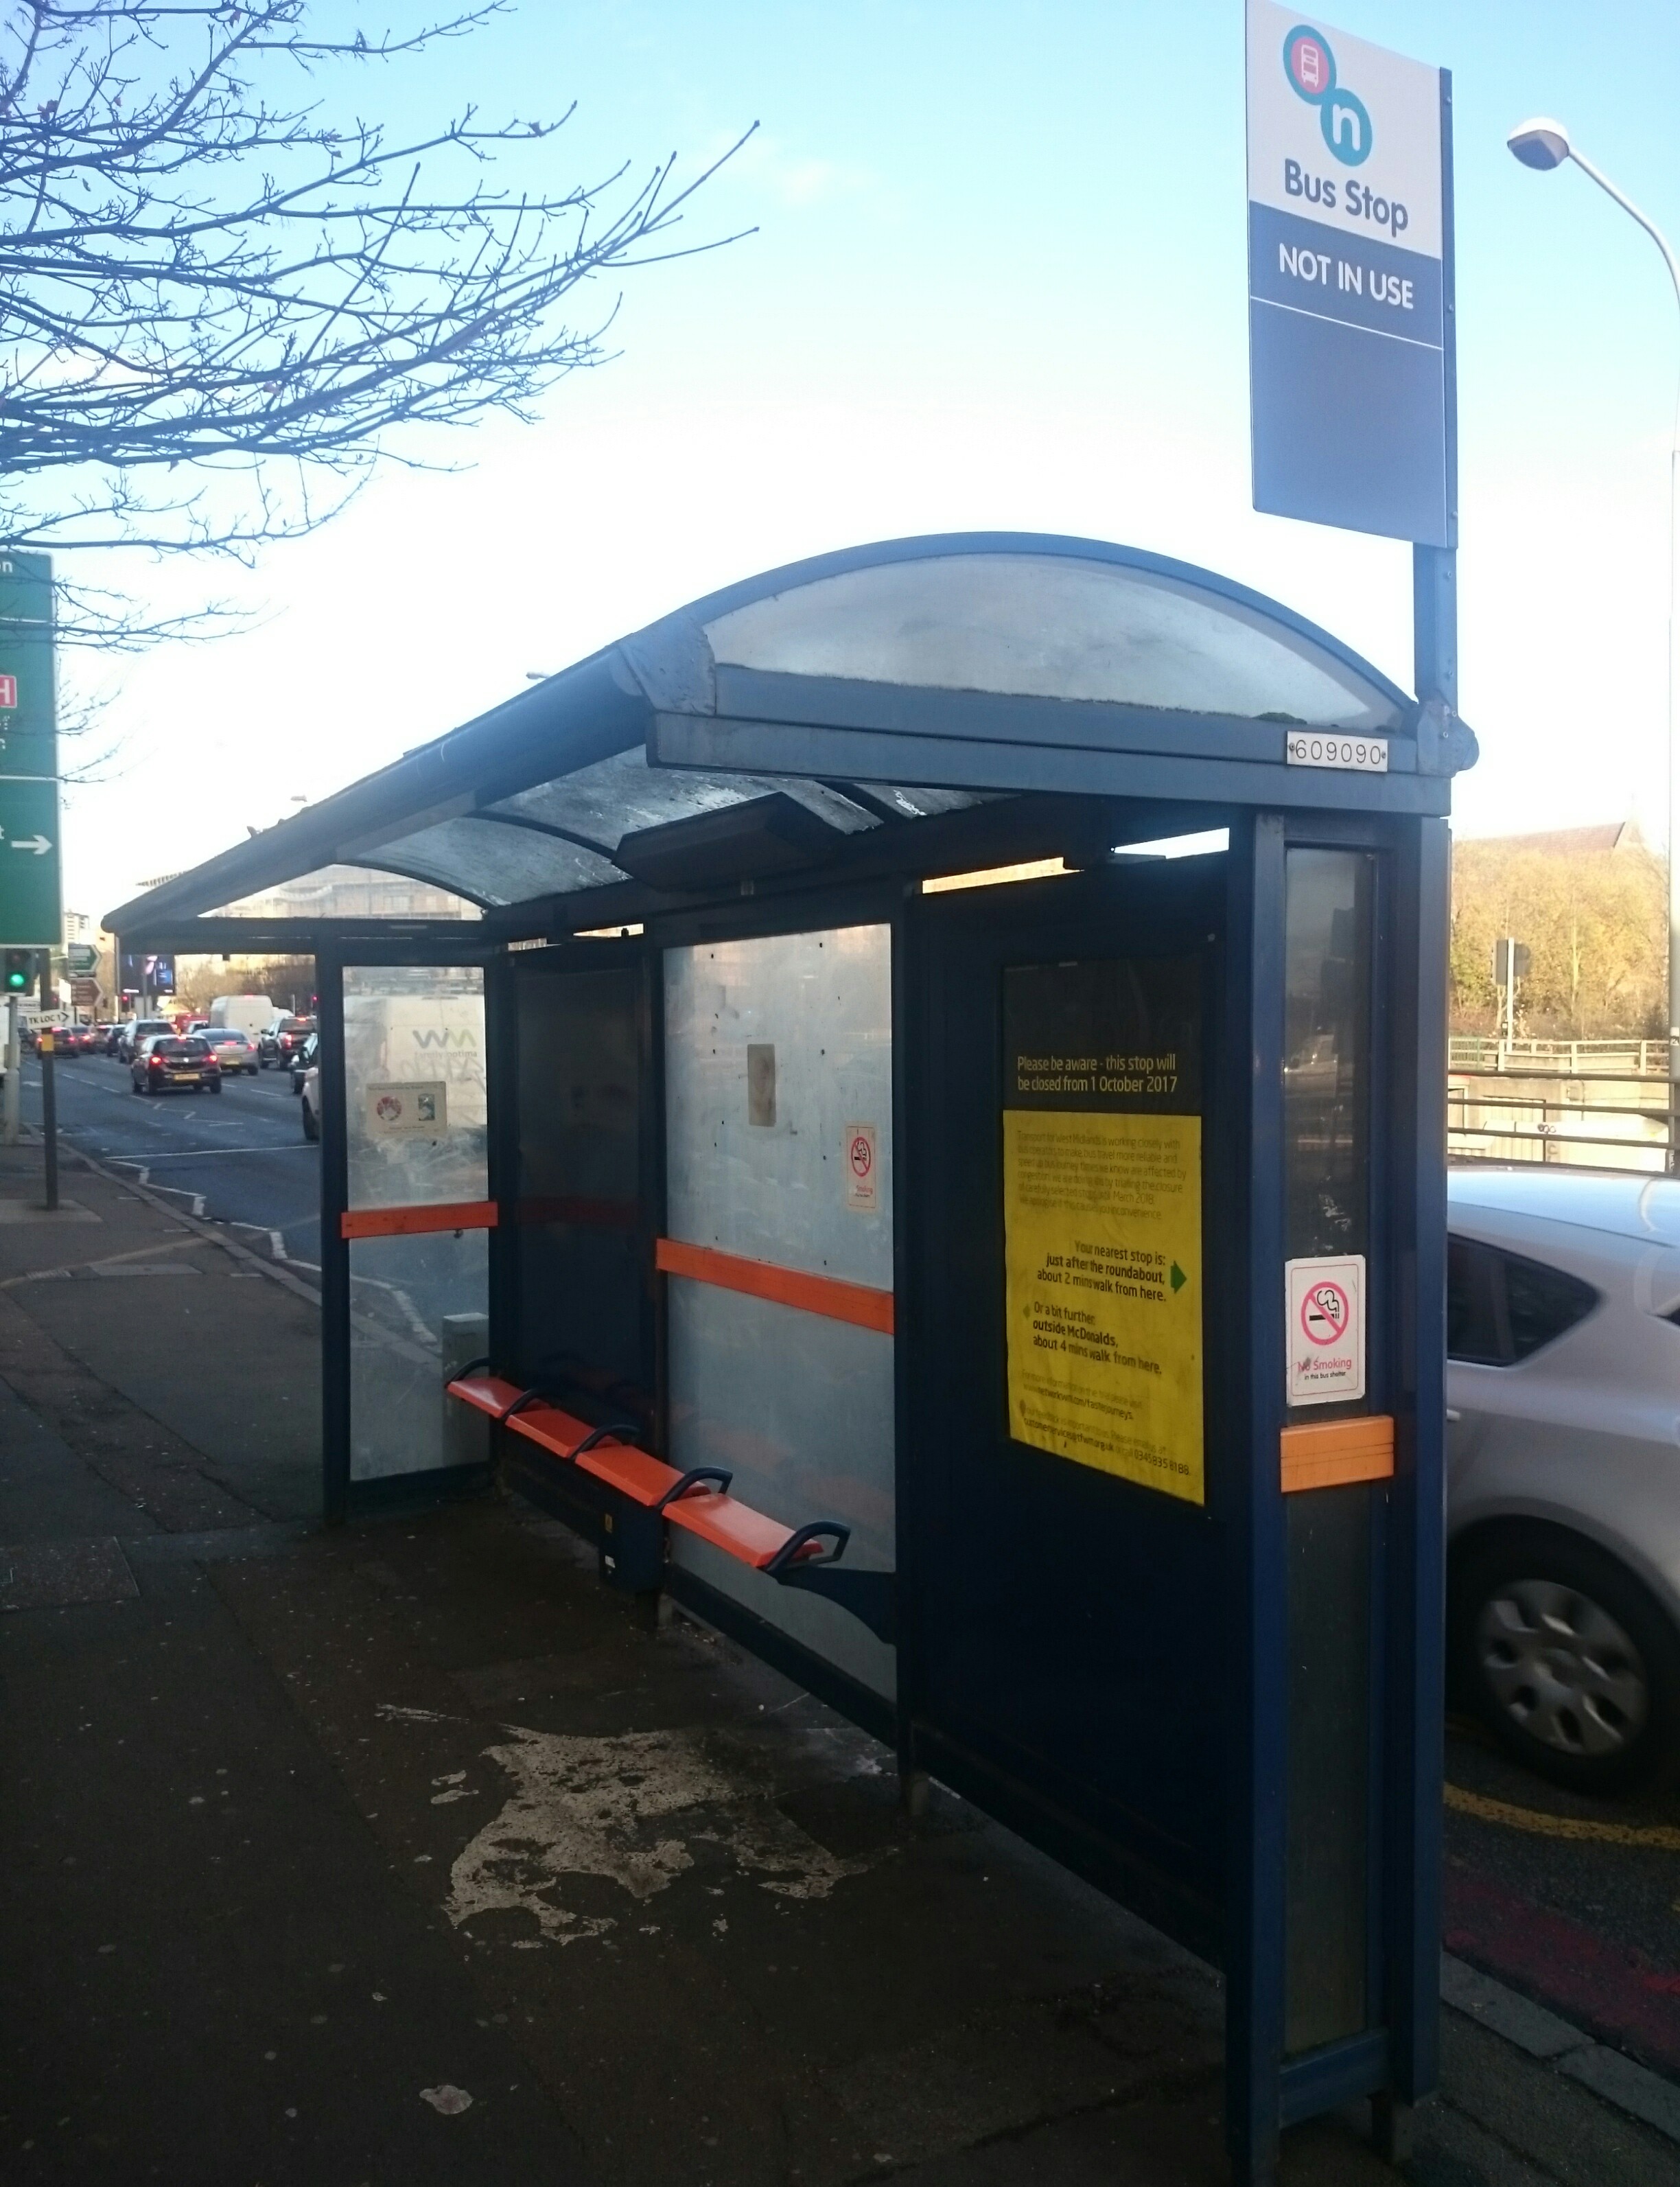 How to report issues with bus stops or shelters